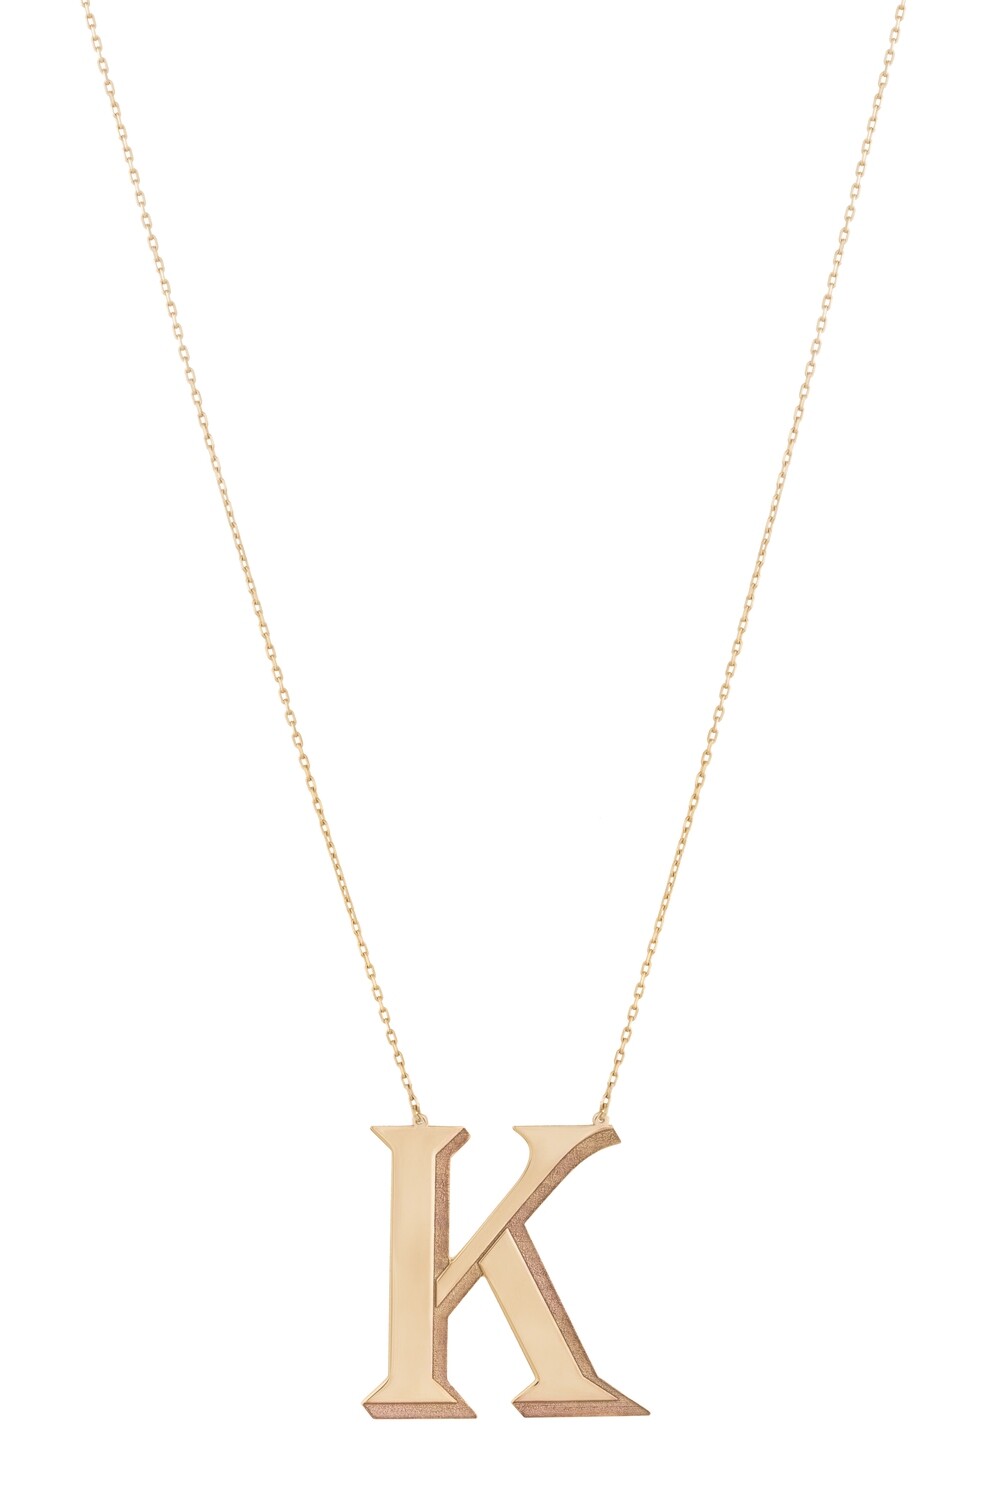 Initials Gold Necklace Letter K